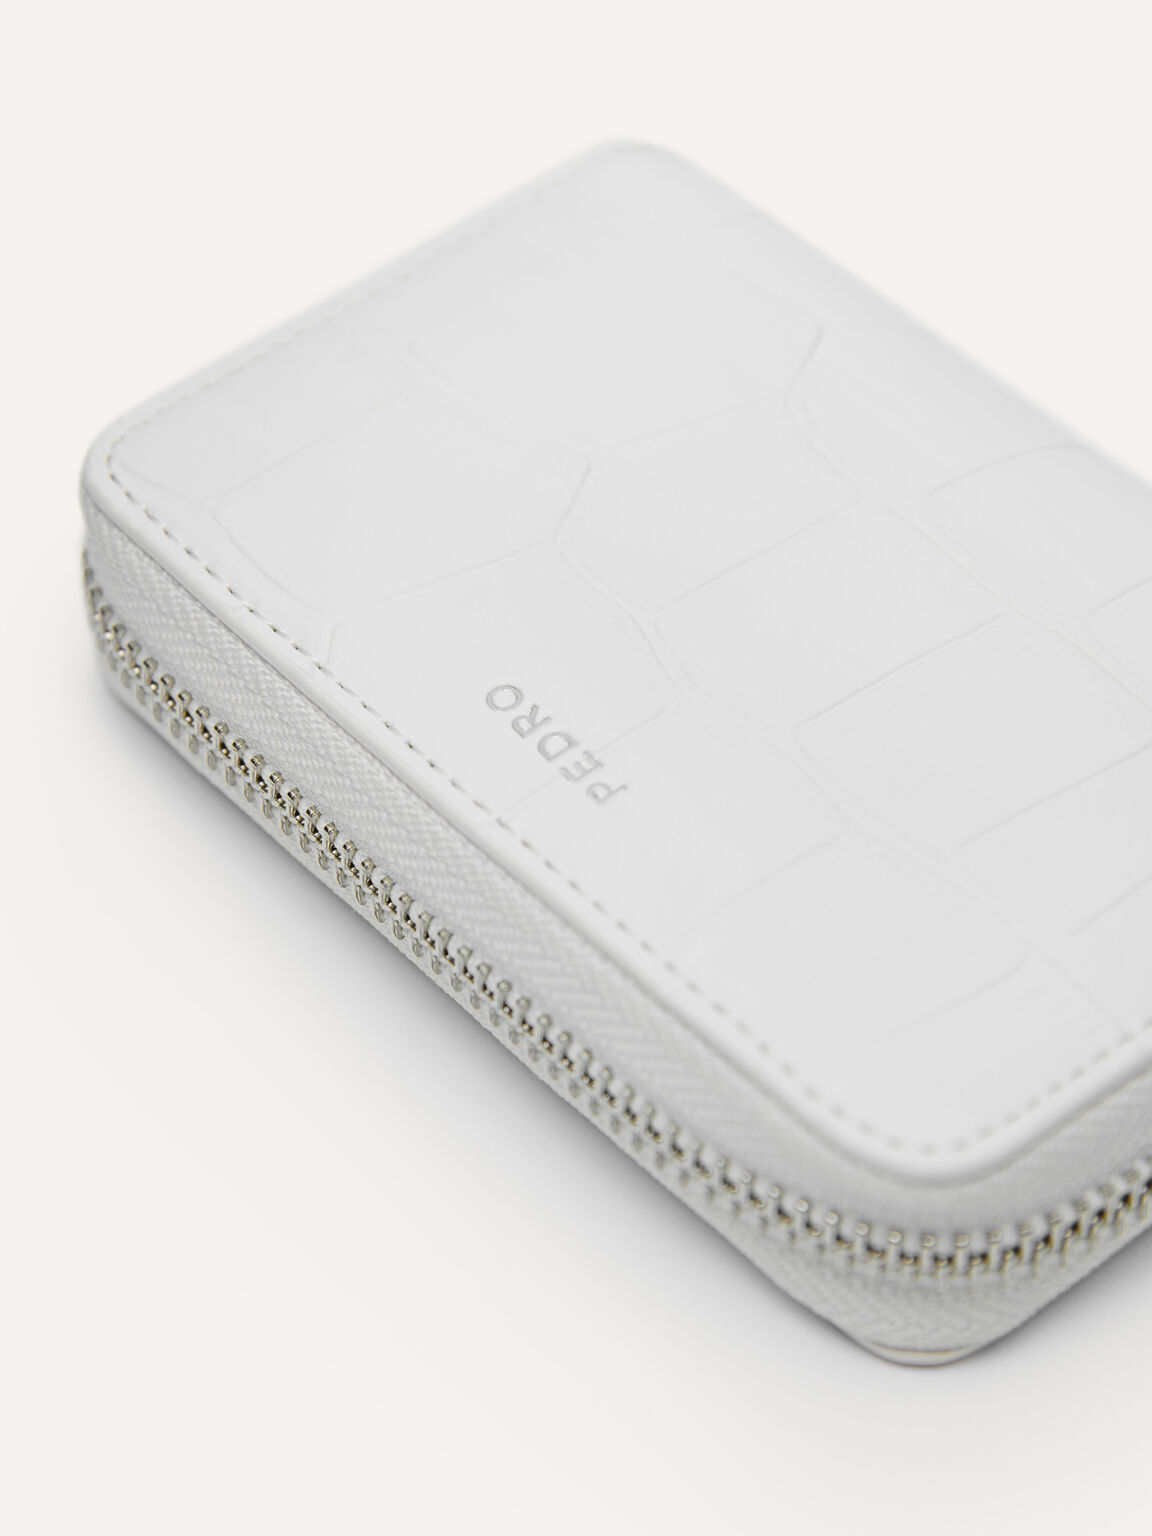 Leather Croc-Effect Pouch, White, hi-res